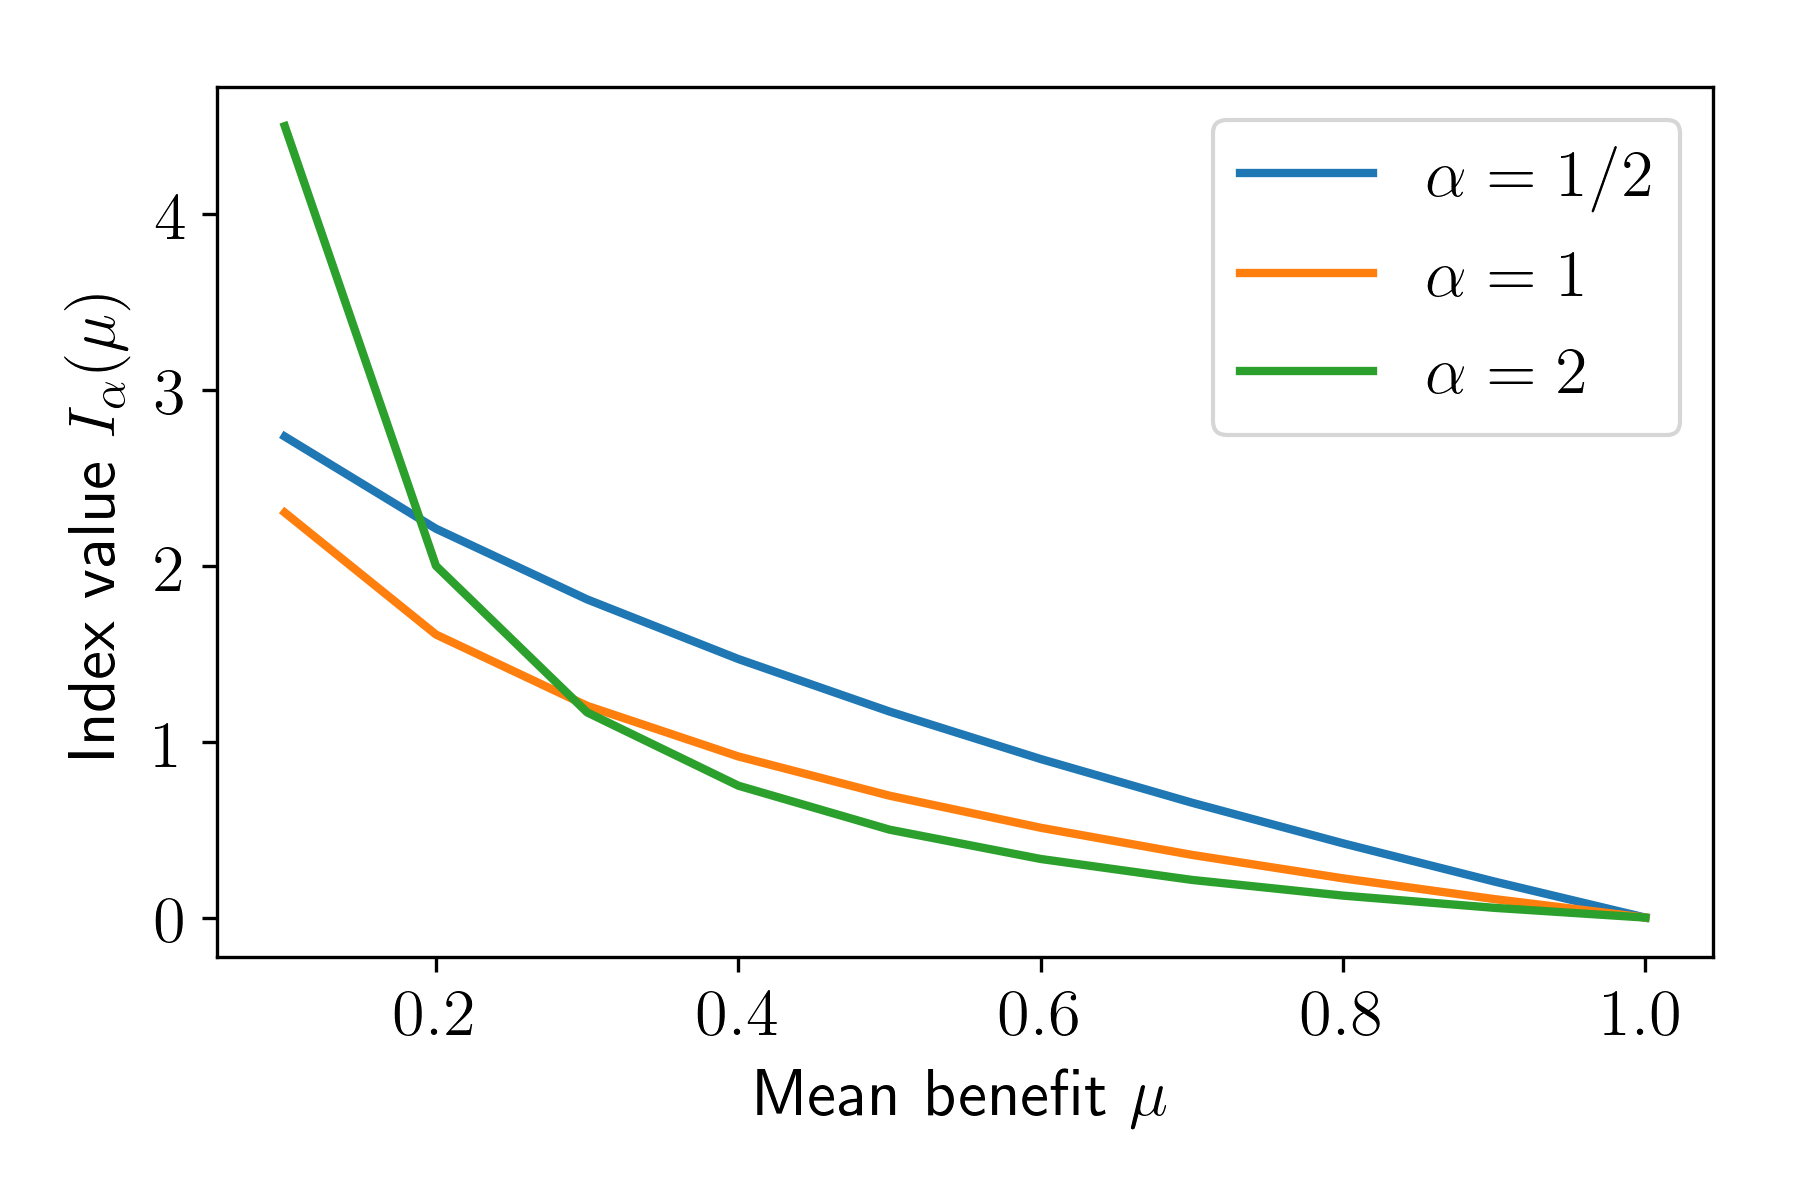 Figure 5.5: Generalised entropy index as a function of the mean benefit \mu for binary benefits.